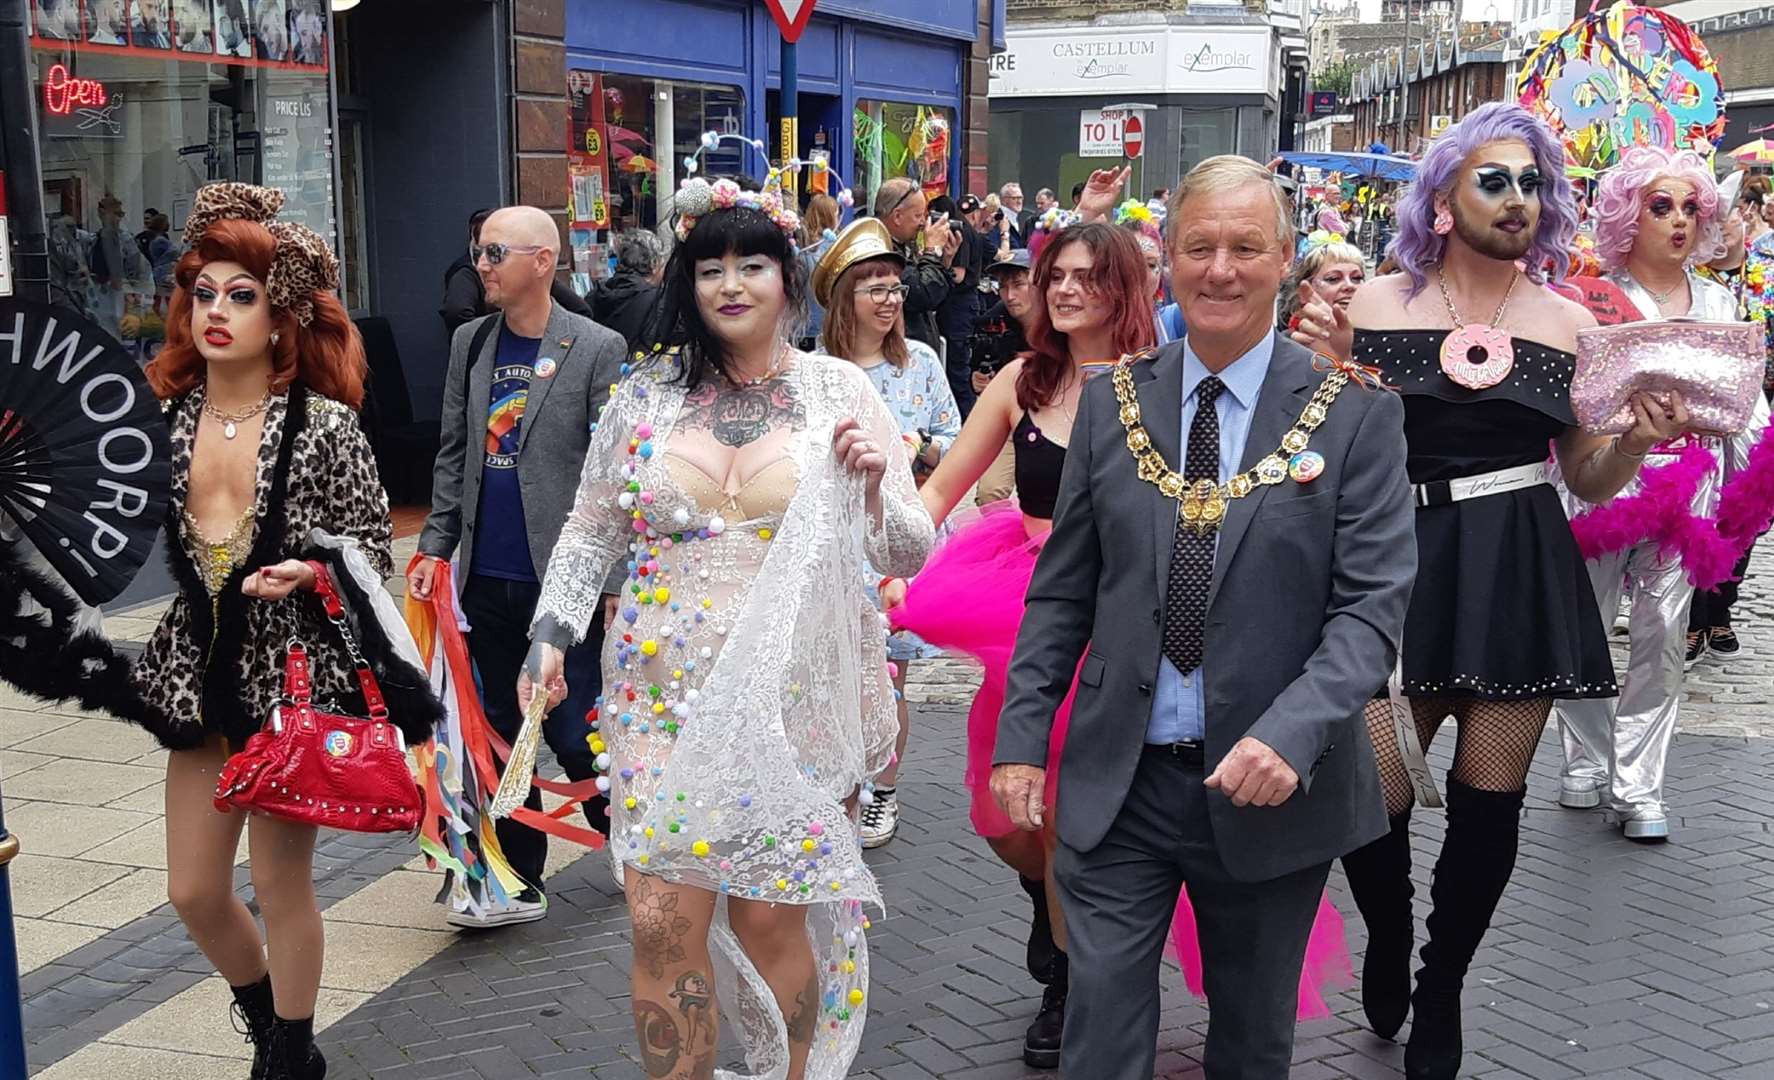 The mayor of Dover joins in the fun at last year's Pride